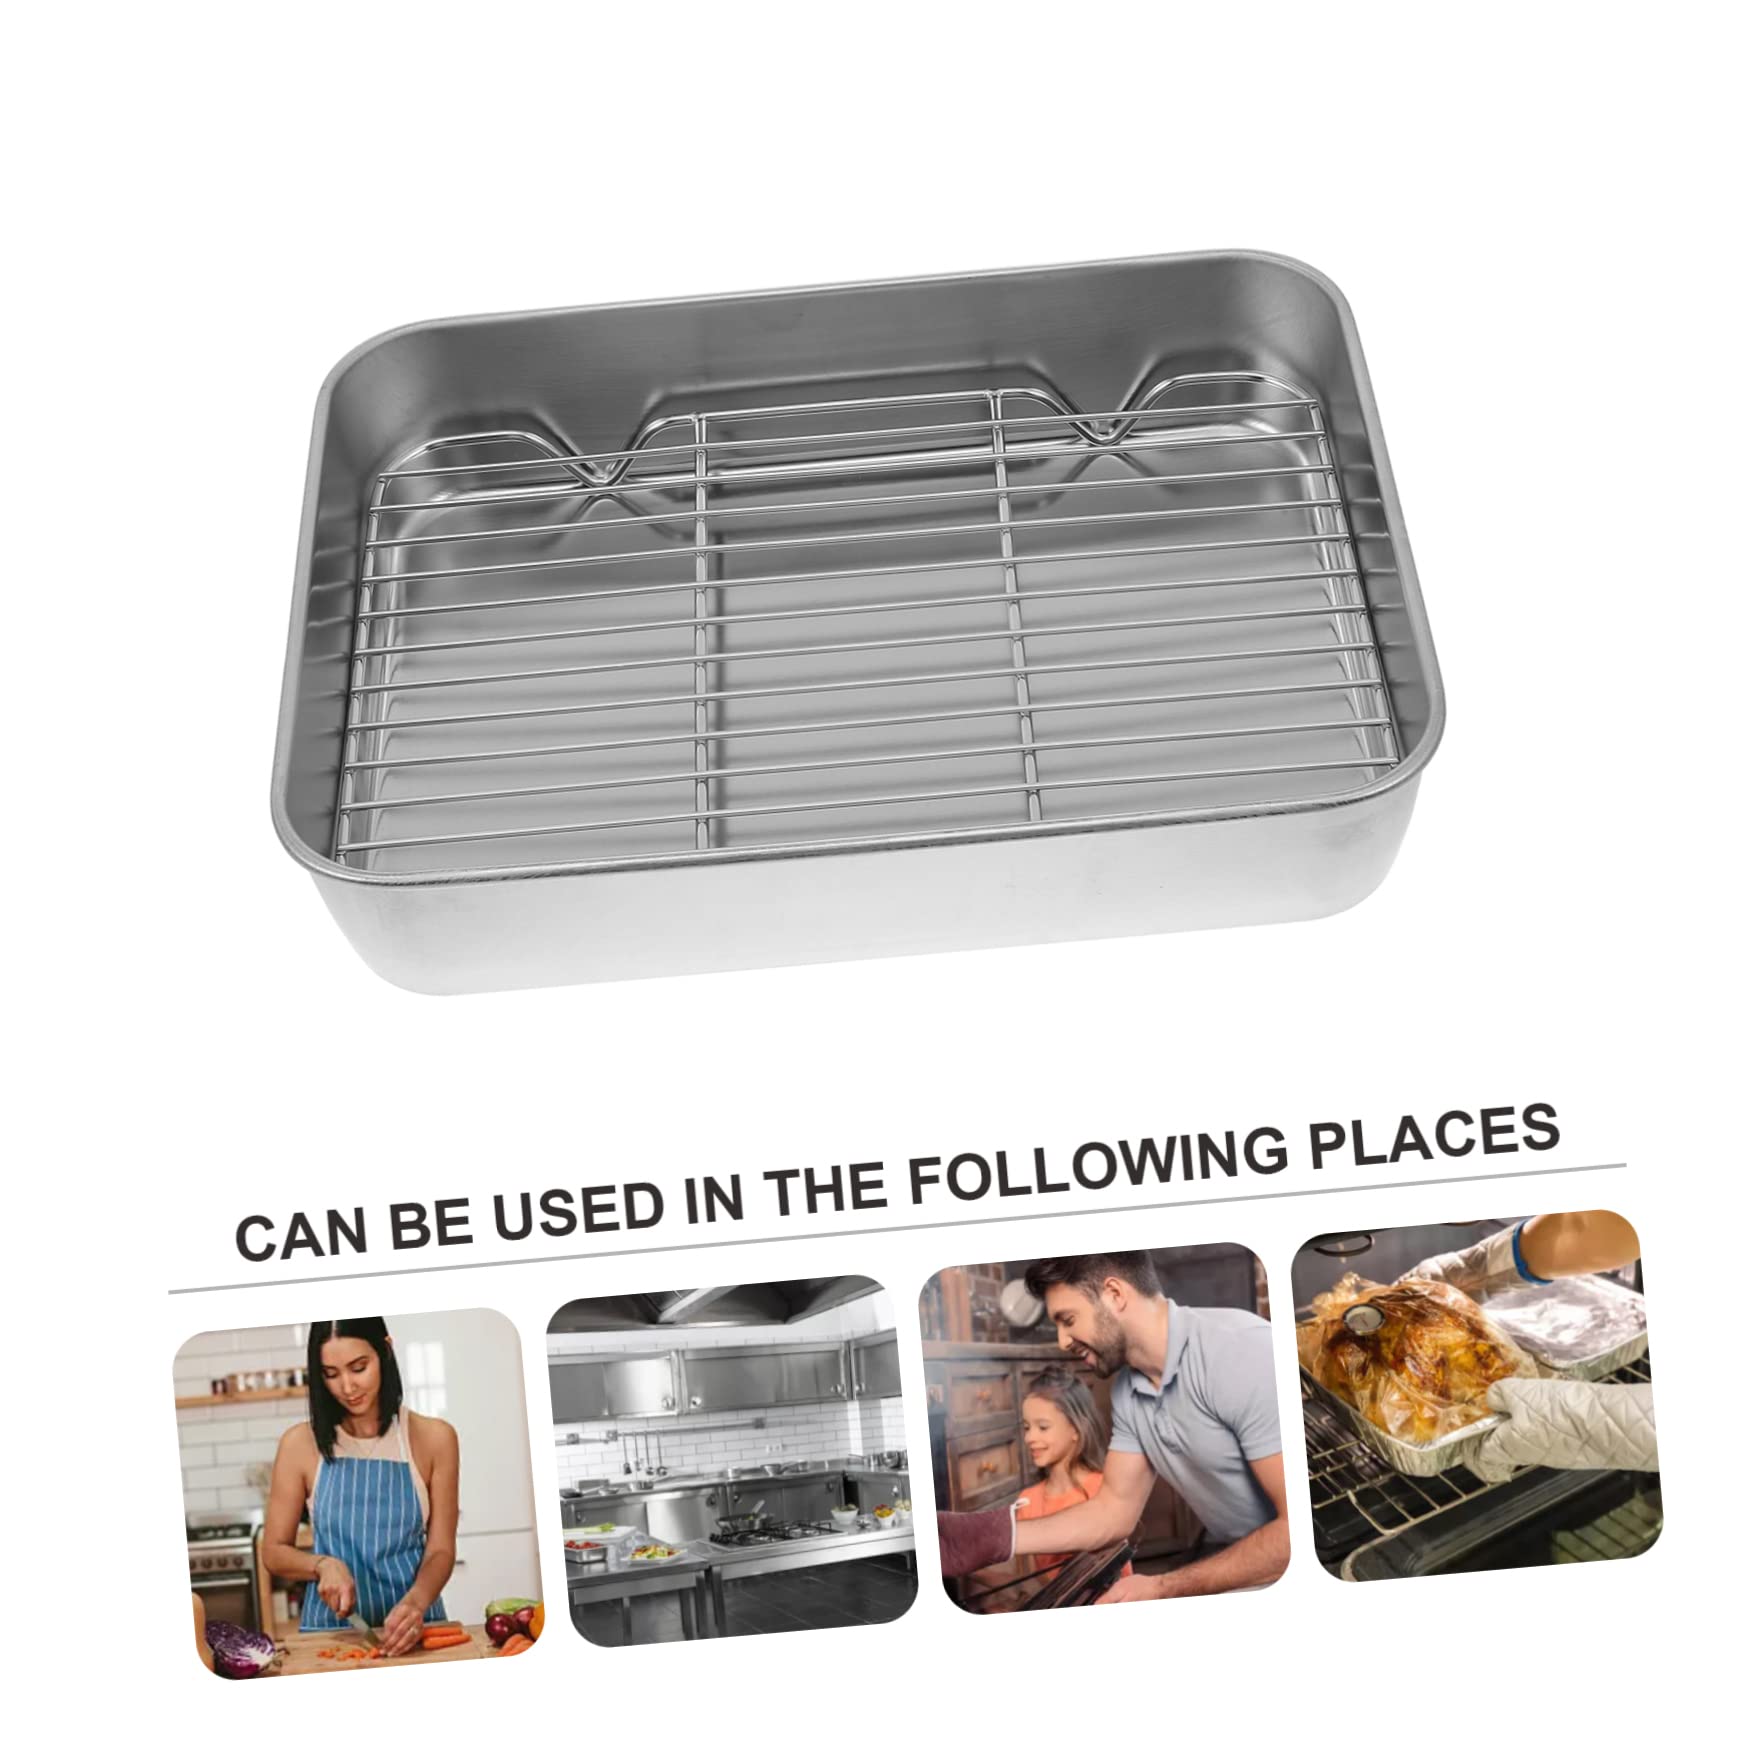 BESTOYARD 1 Set Stainless Steel Bakeware Cake Plates Disposable Pizza Ovens Cupcakes Mini Grill Heavy Duty Aluminum Foil Oven Roaster Pan with Lid Mini Oven Pans Japanese-style Grill Plate